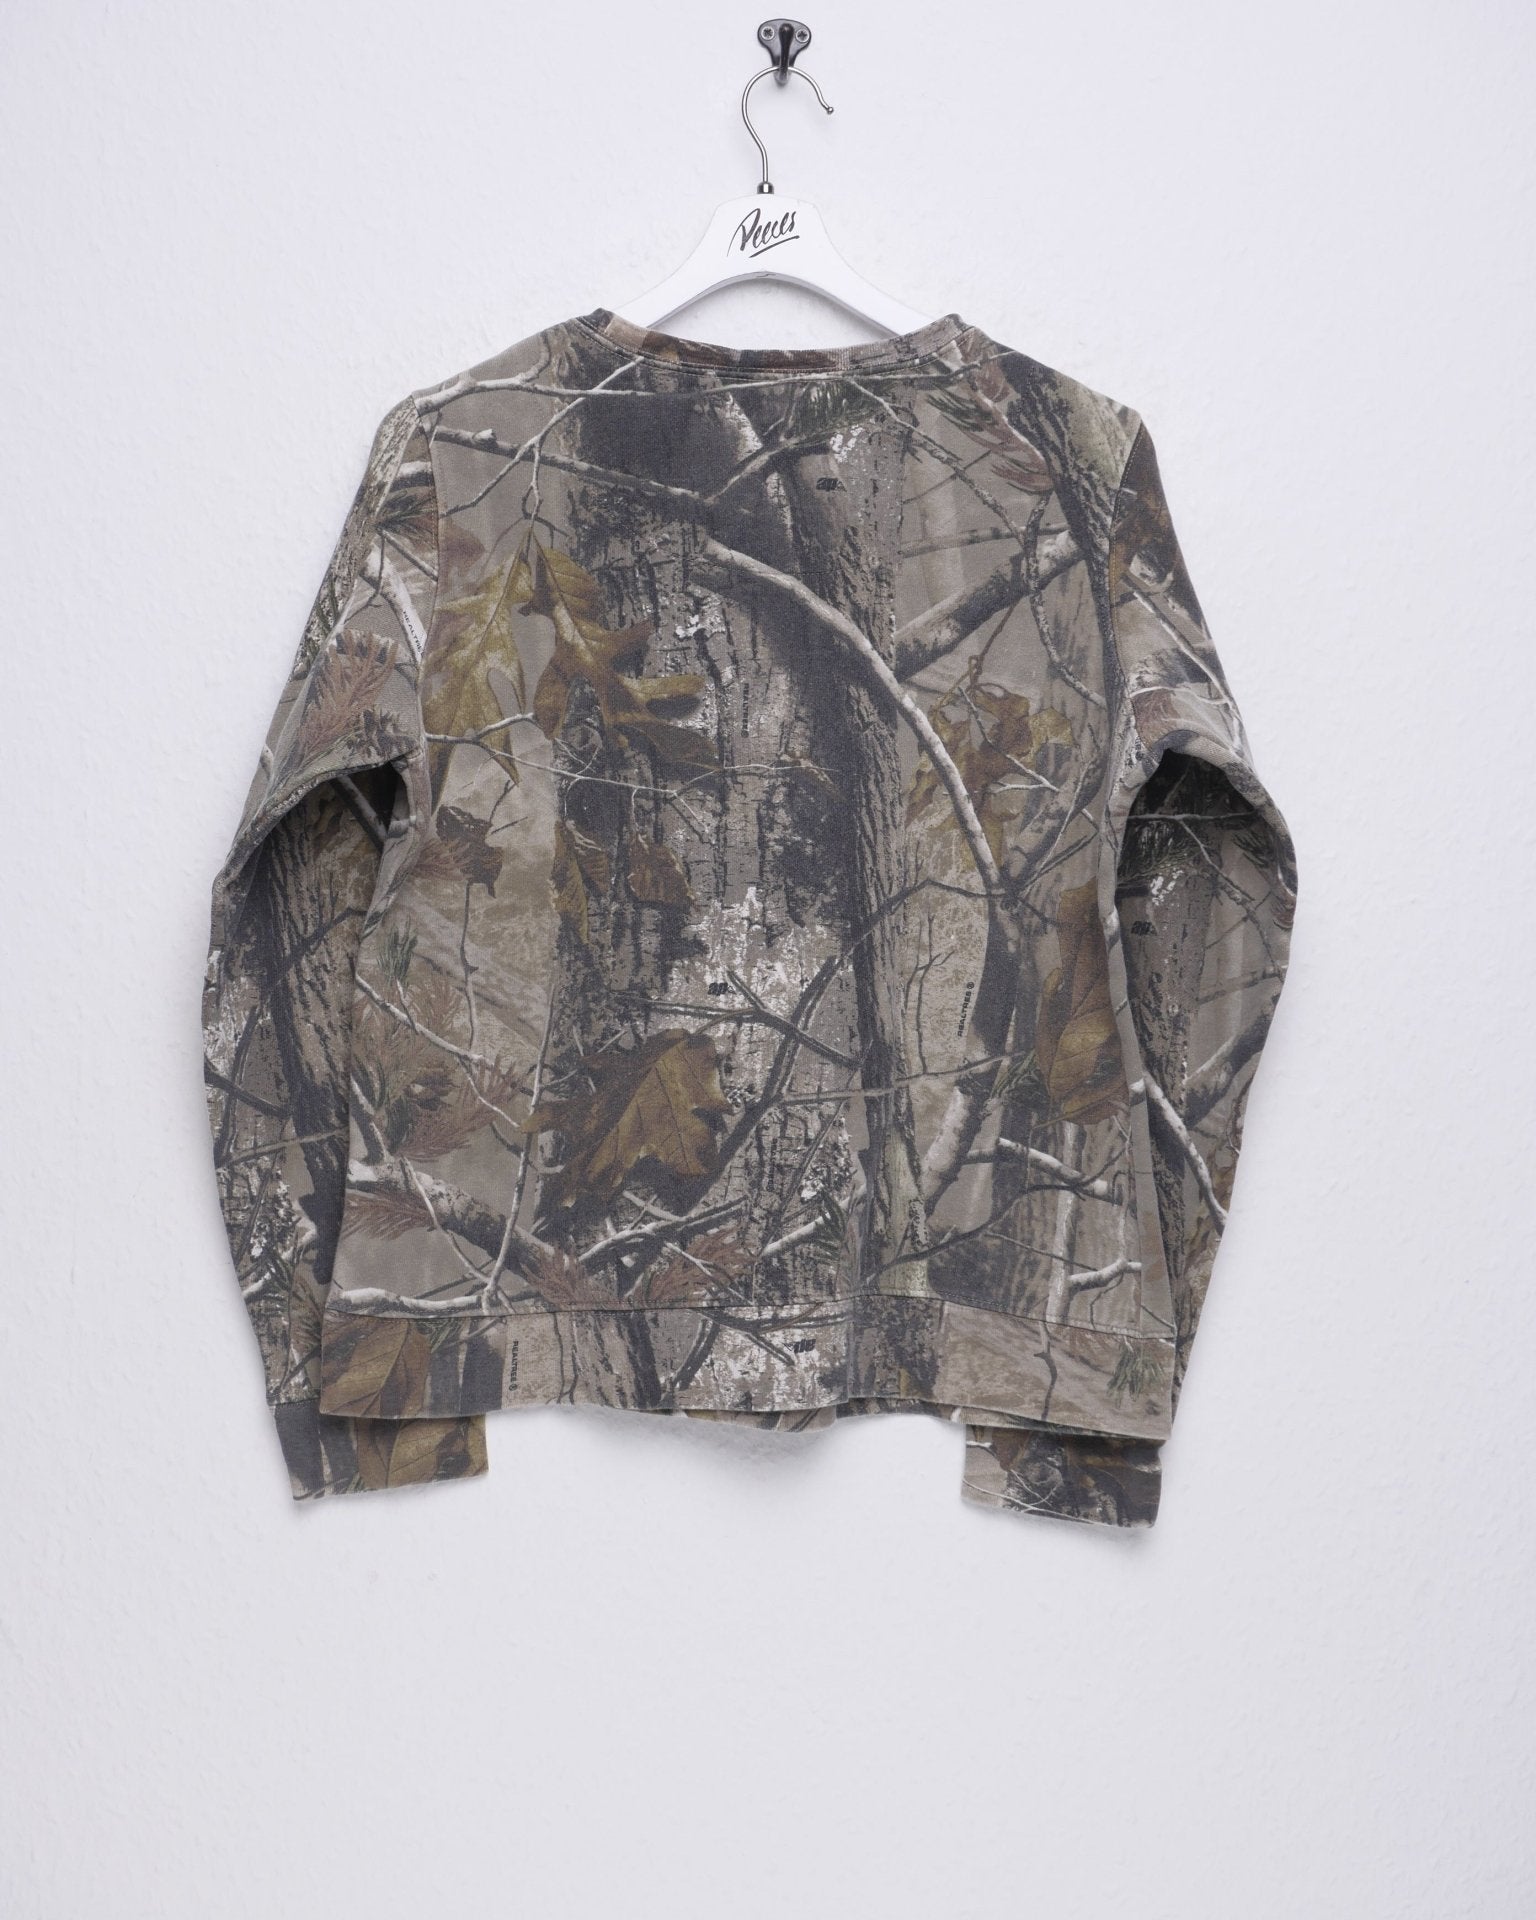 Realtree printed Graphic Sweater - Peeces